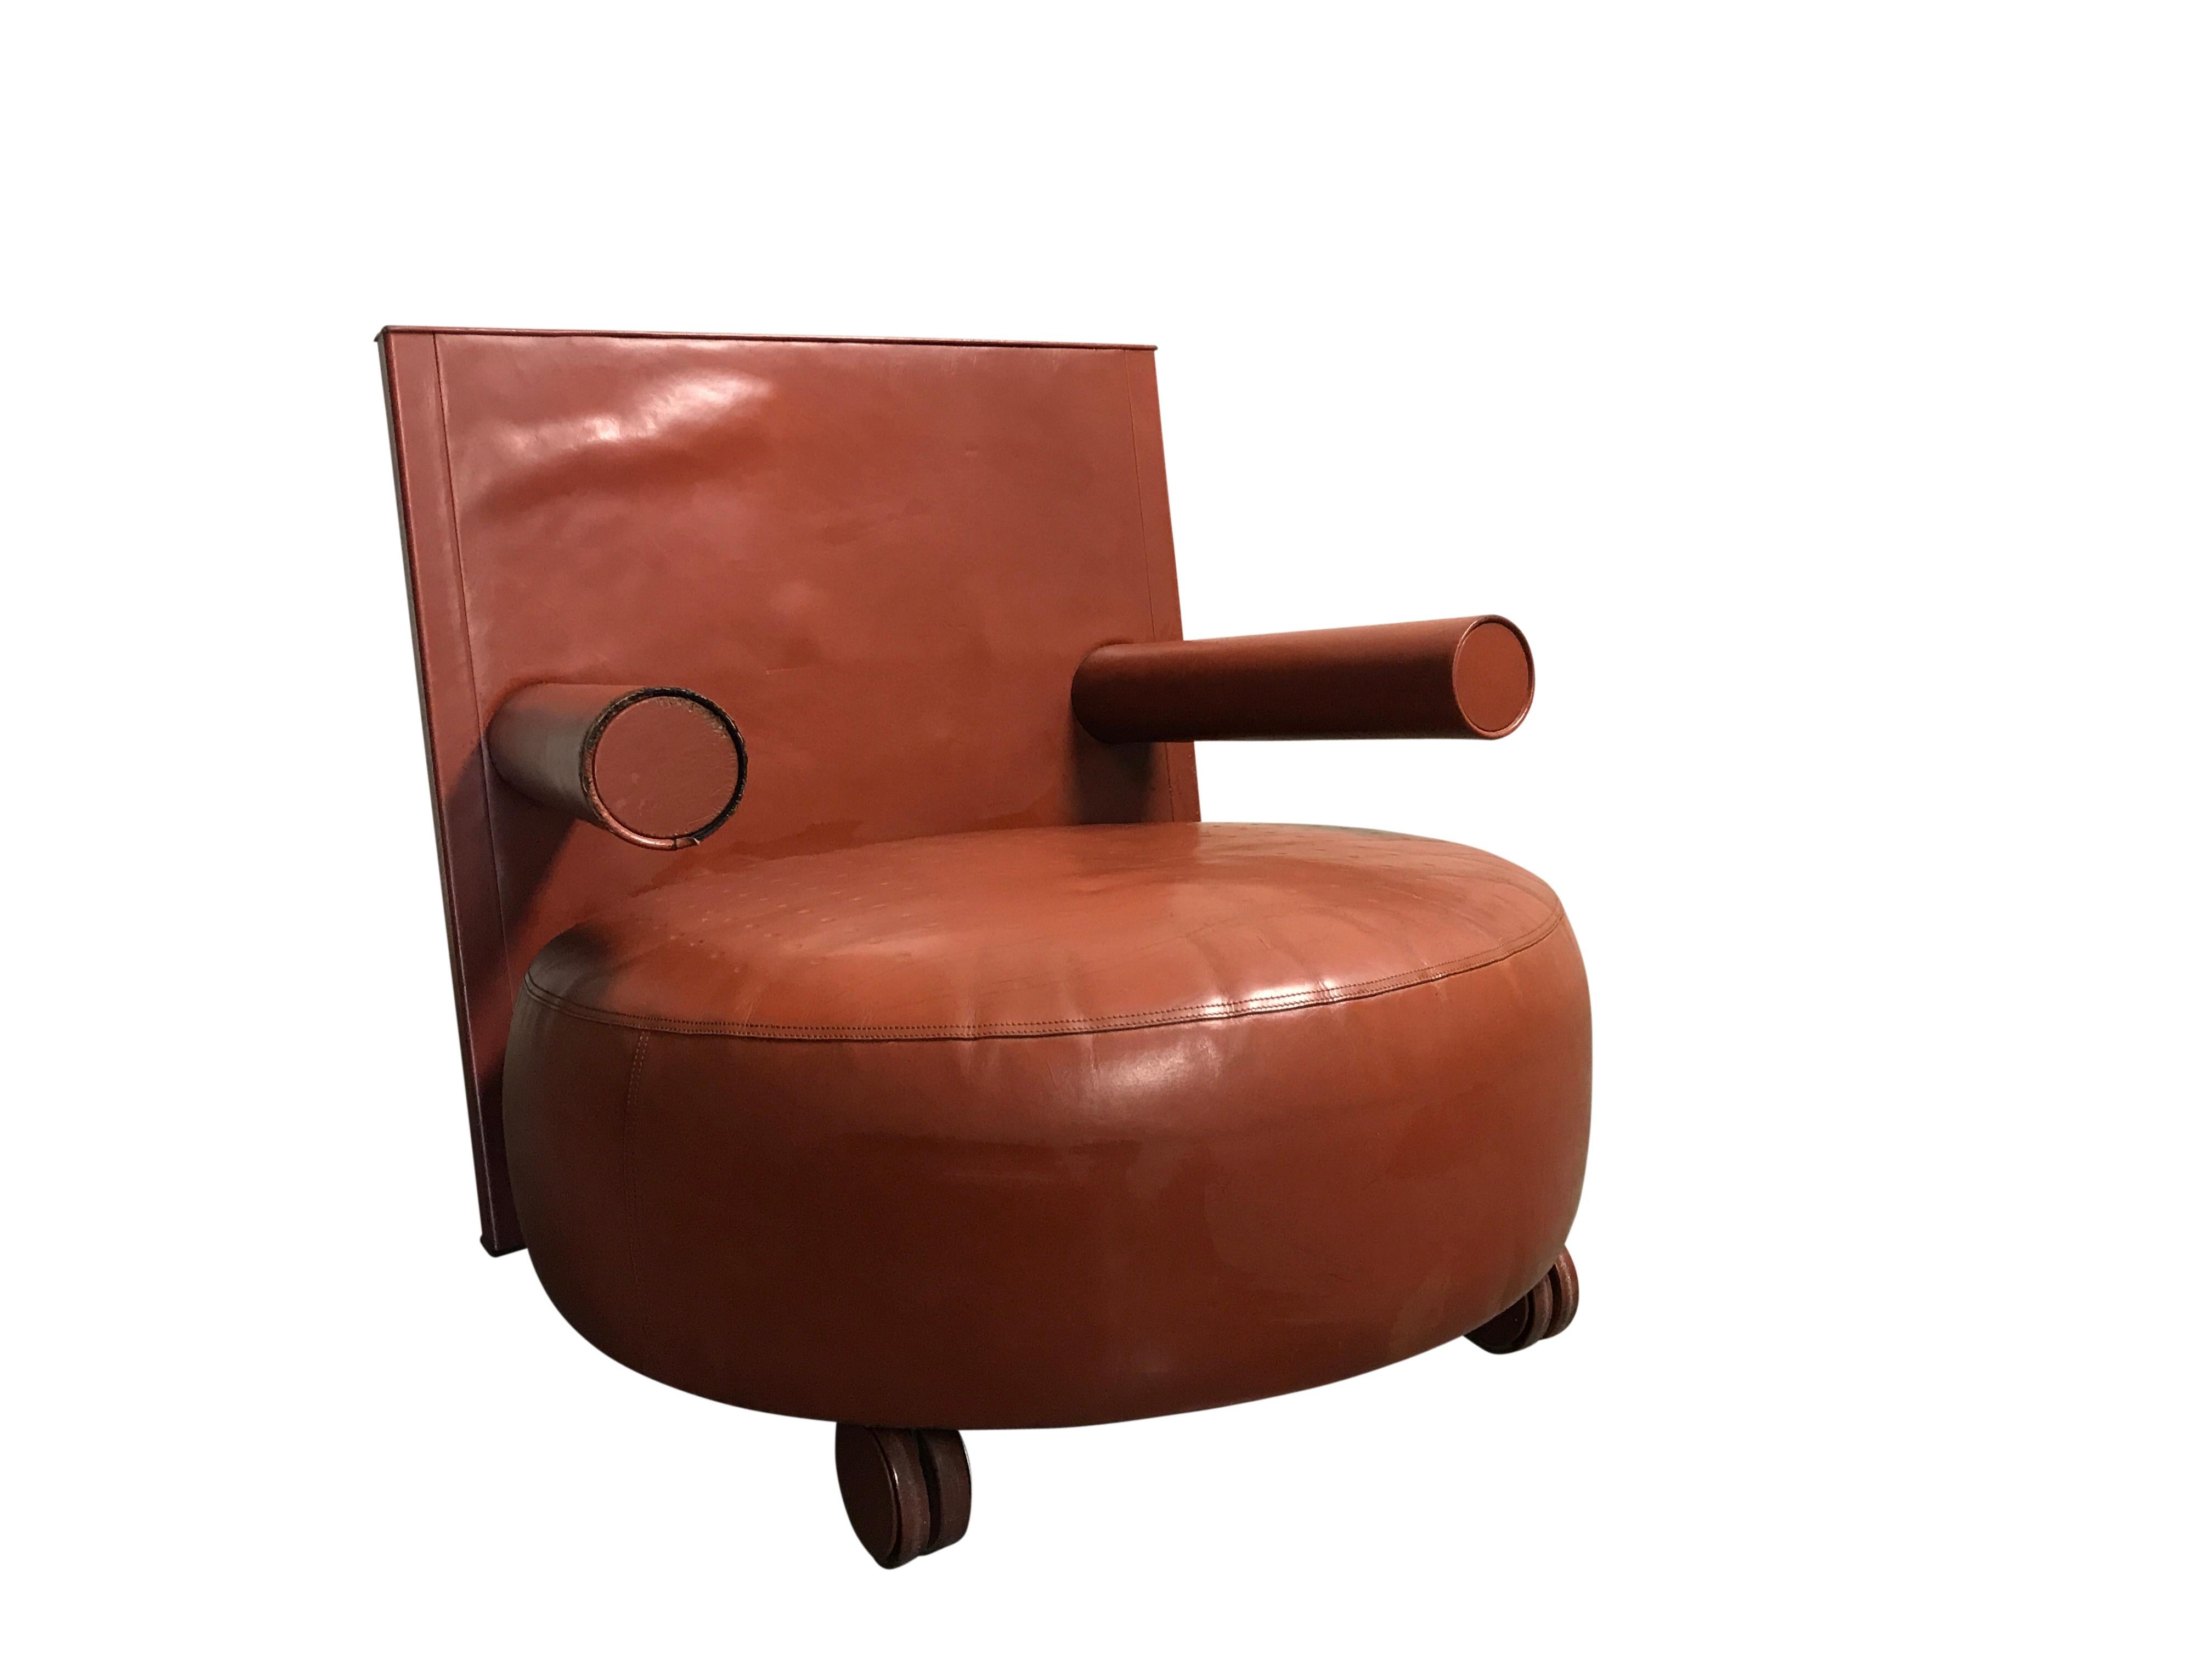 Vintage Baisity lounge designed by Antonio Citterio for B&B Italia.

The chairs is made from red leather and has a unique design with oversized armrests and a comfortable seating area.

The chairs also has two wheels on the front.

Condition